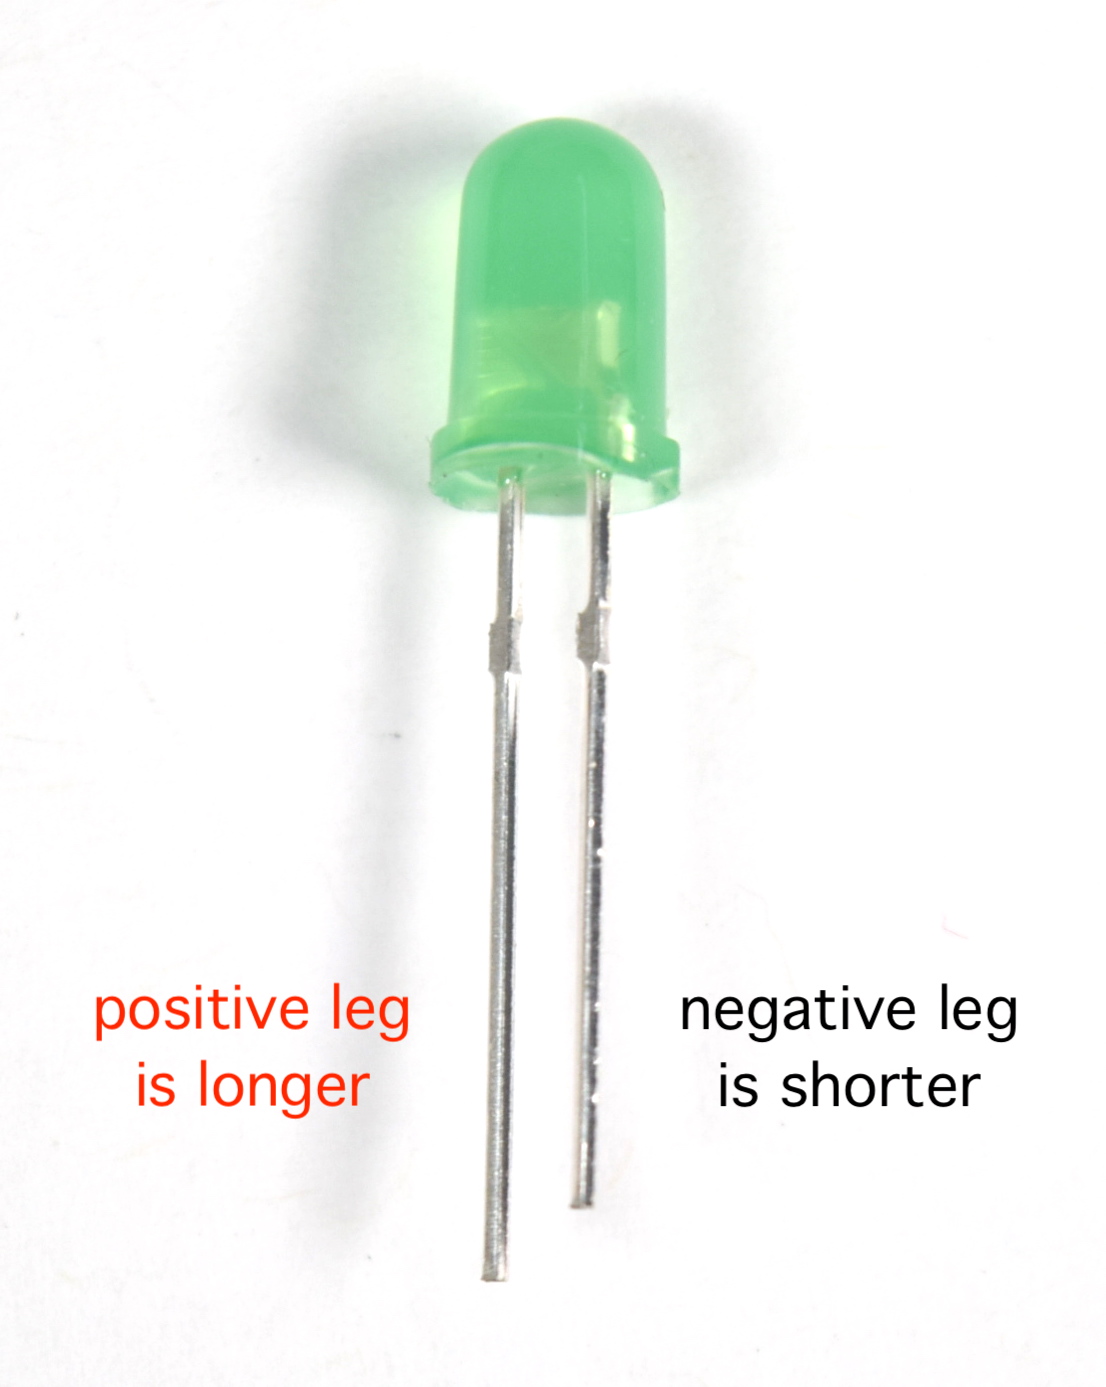 Photograph of an LED, with the long leg labeled as "positive" and the short leg labeled as "negative"